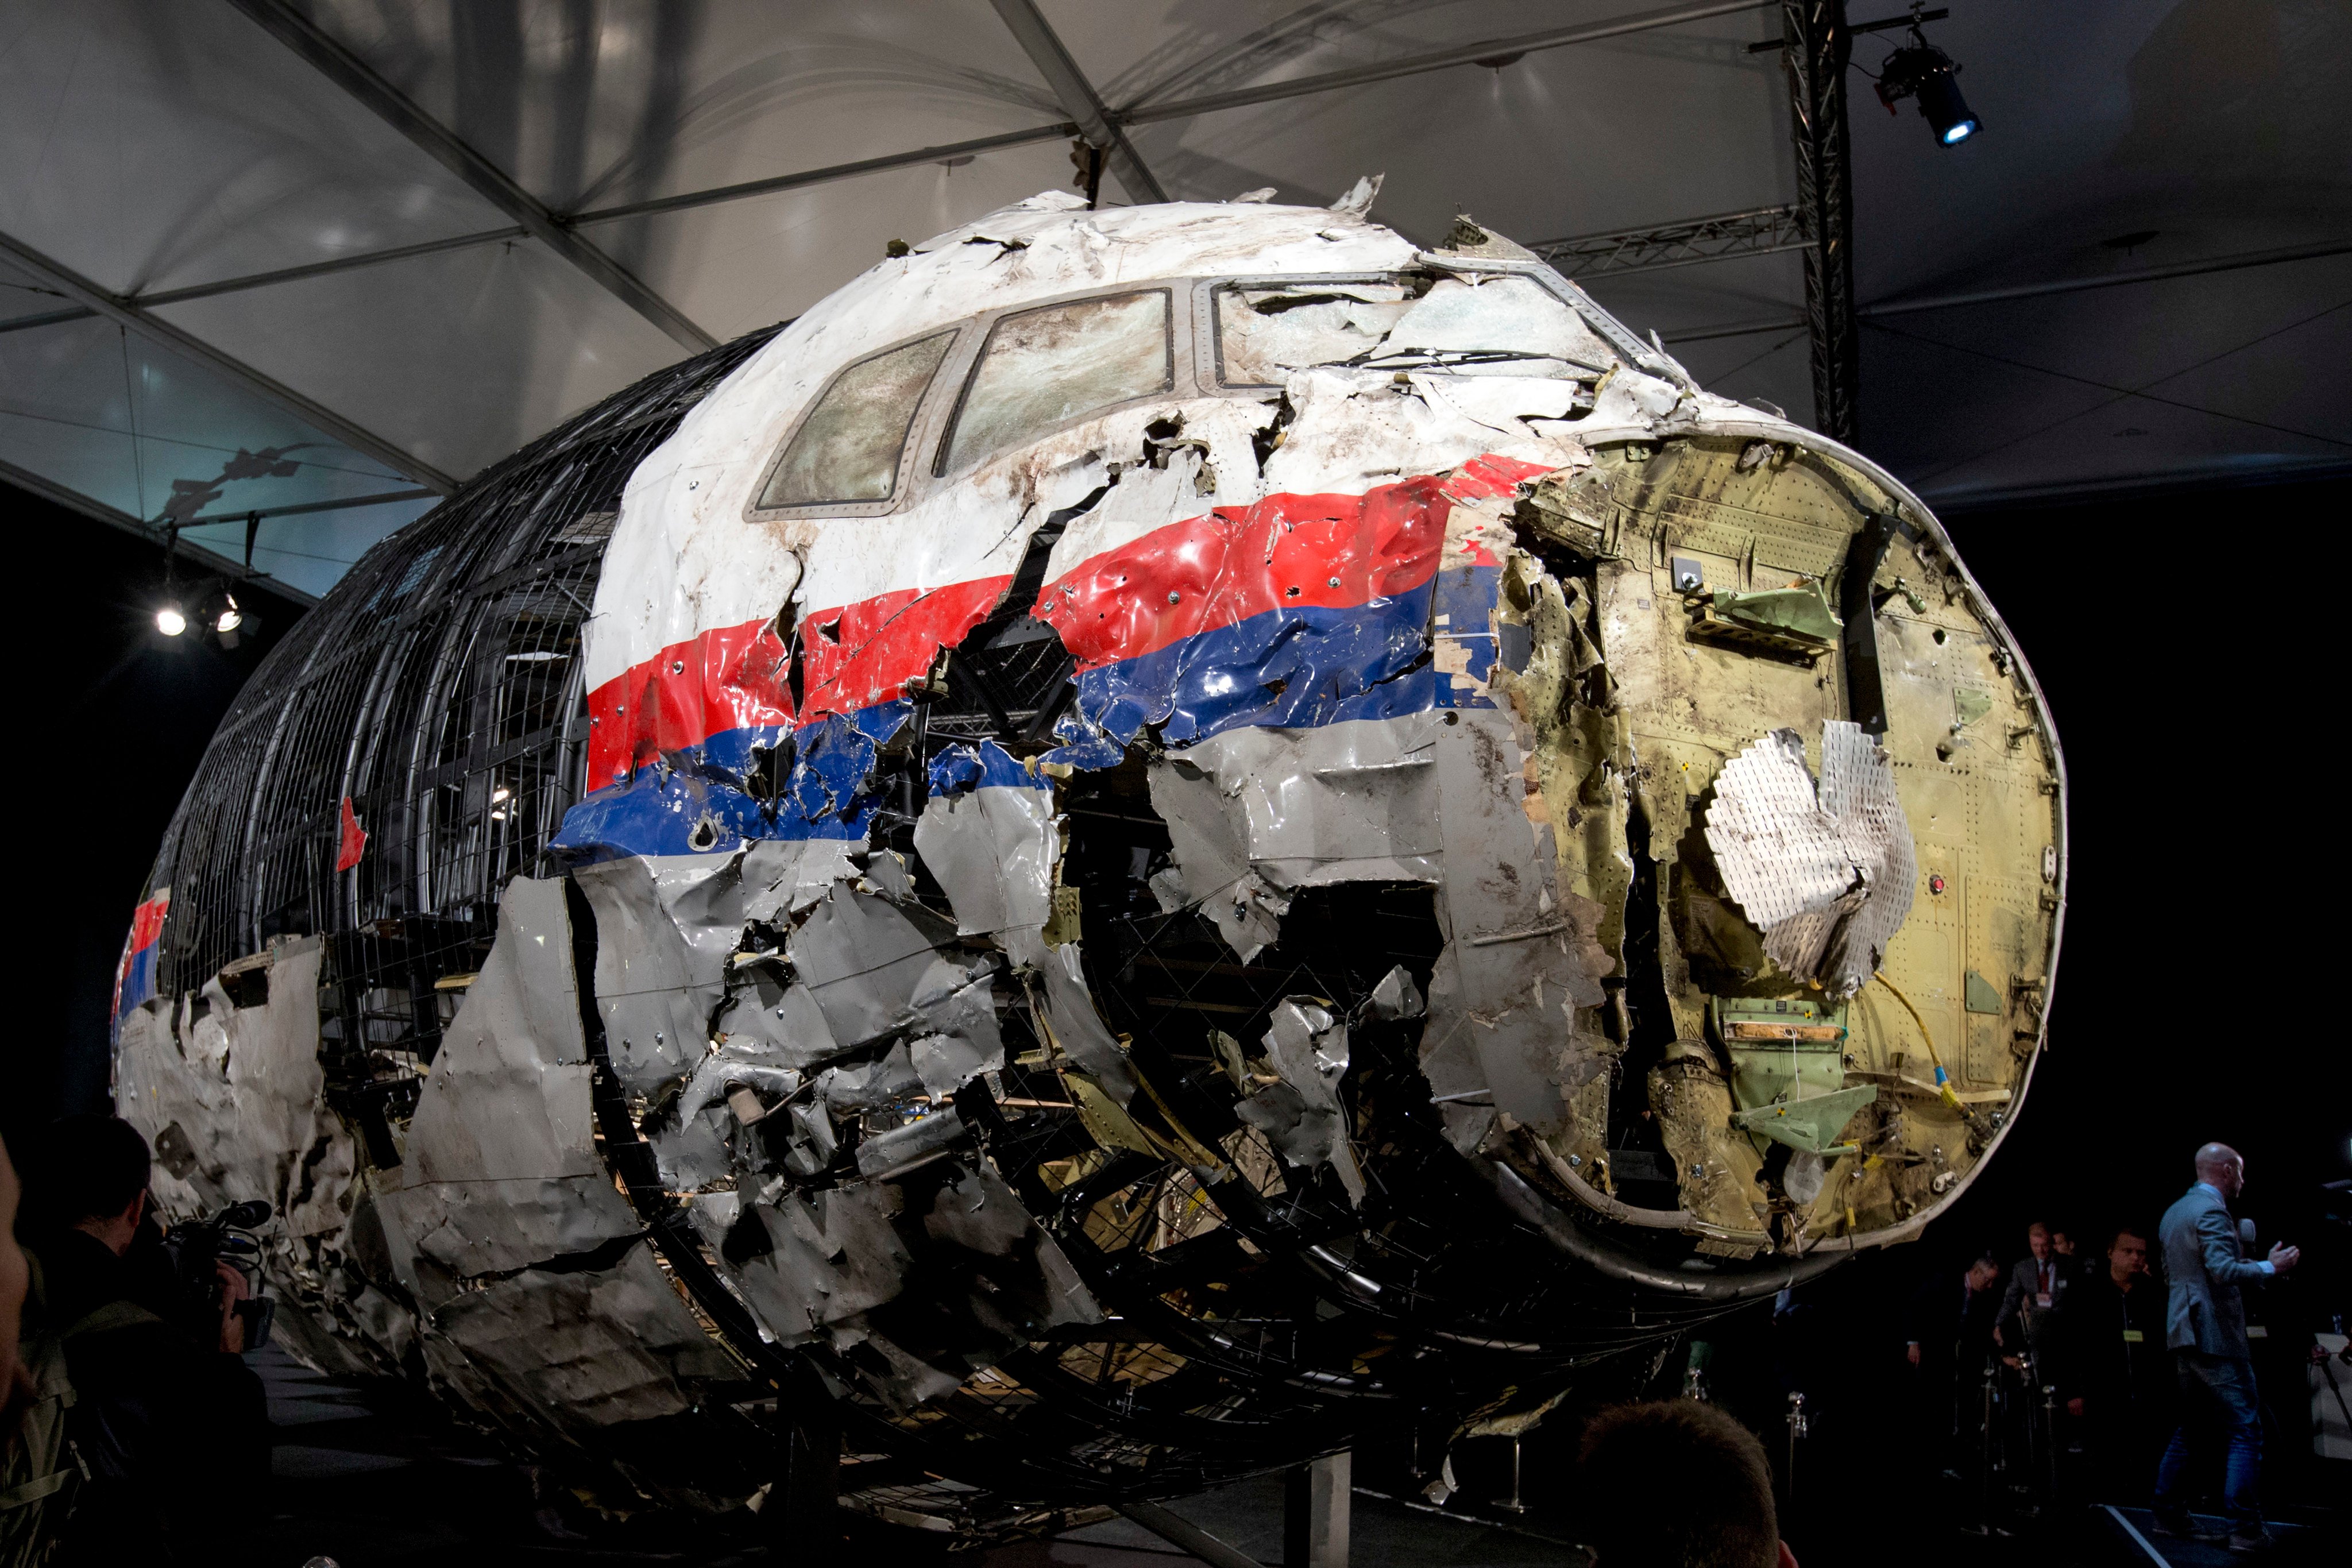 Reconstructed wreckage of Malaysia Airlines Flight MH17, put on display during a press conference in the Netherlands. Photo: AP/File